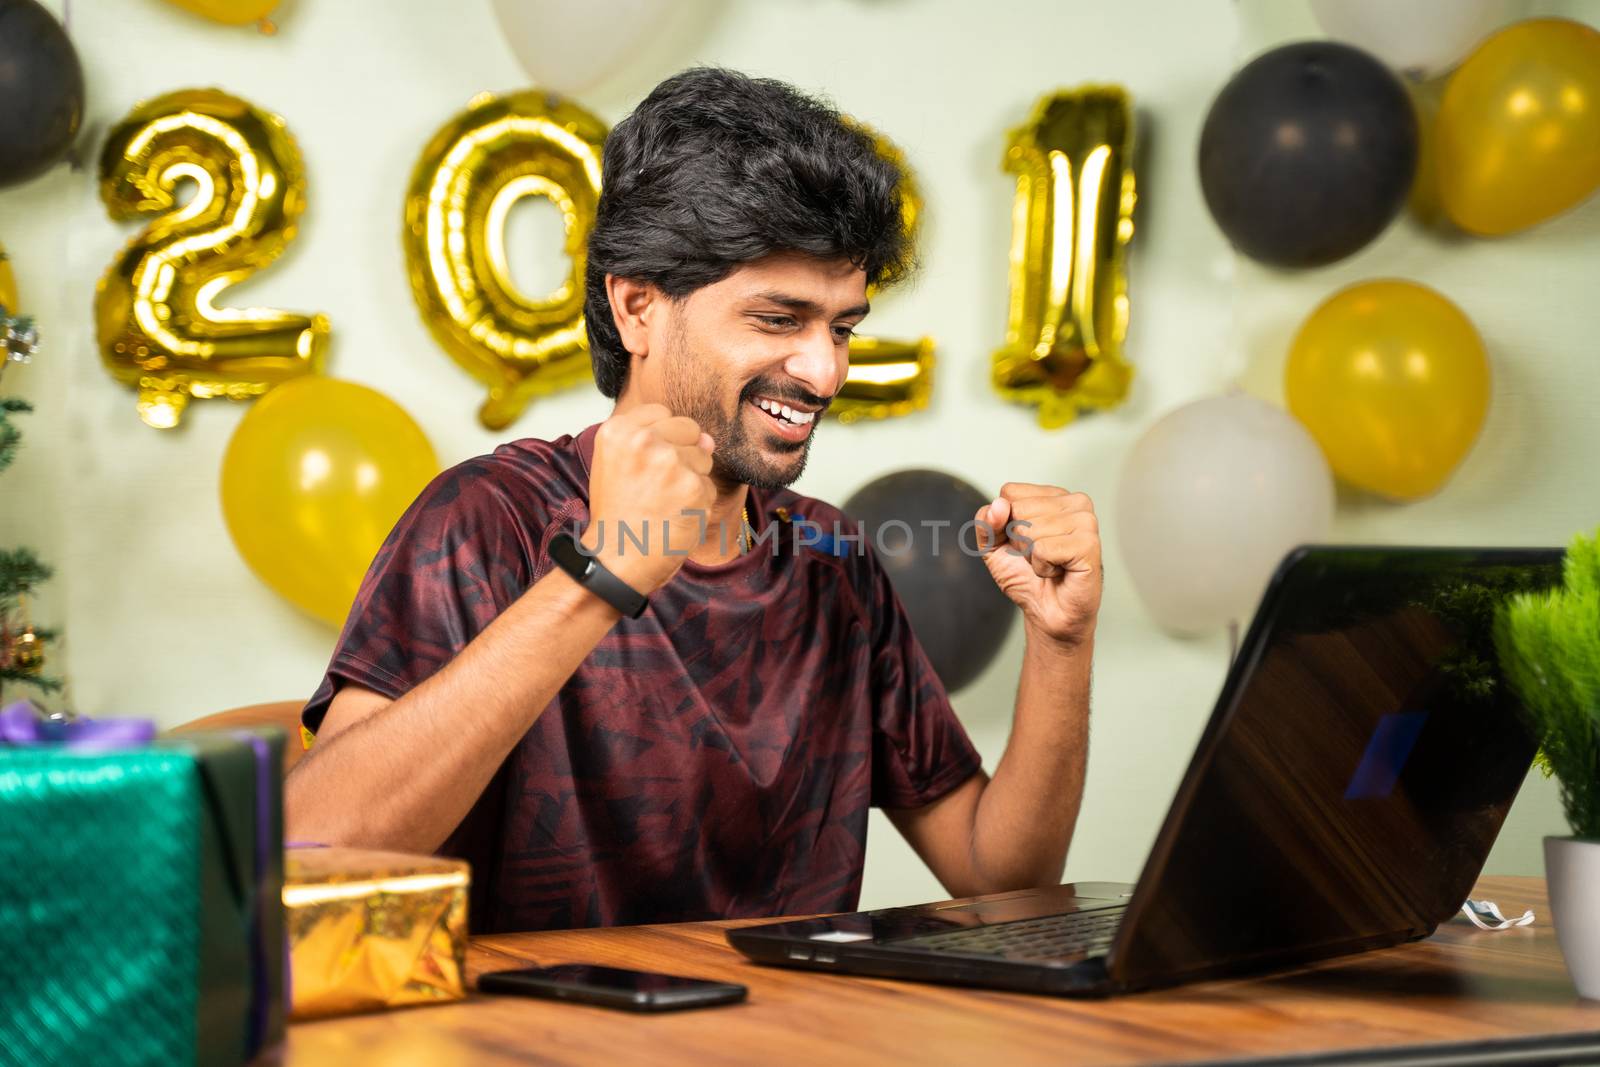 Concept of good news, job offer or luck during 2021 new year showing by happy excited young man in front of laptop with new year decorated background at home